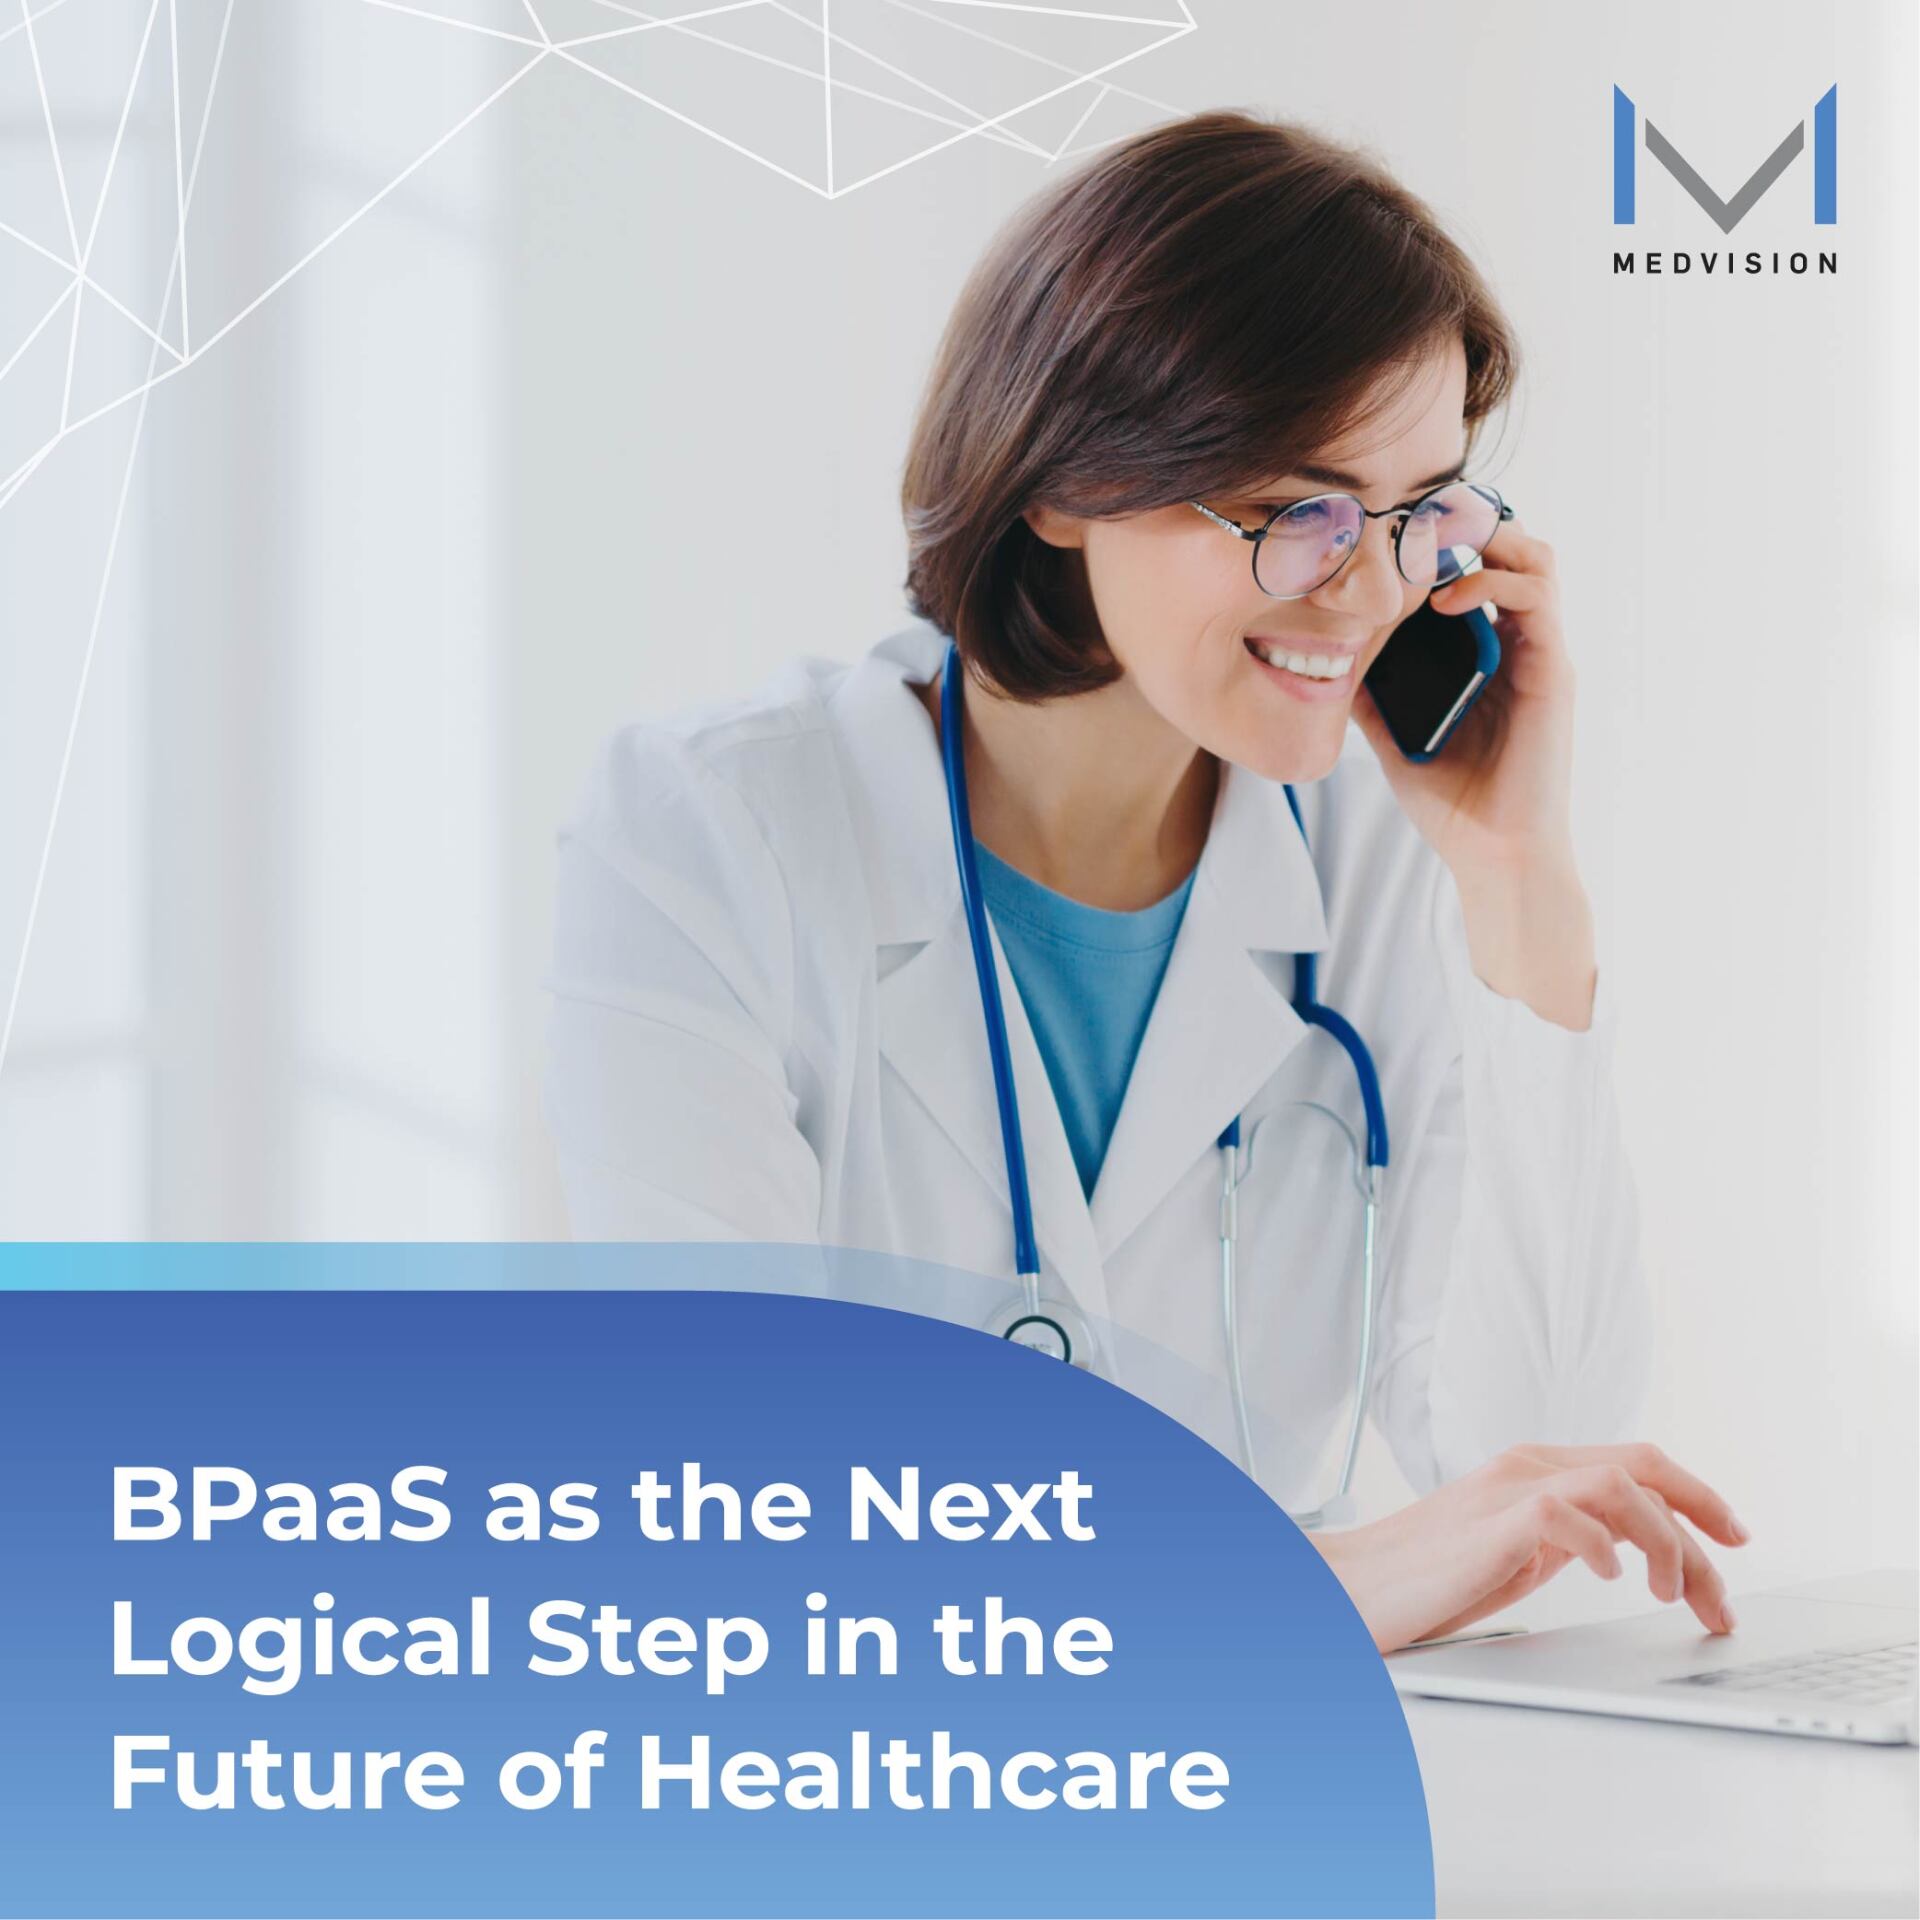 BPaaS as the Next Logical Step in the Future of Healthcare